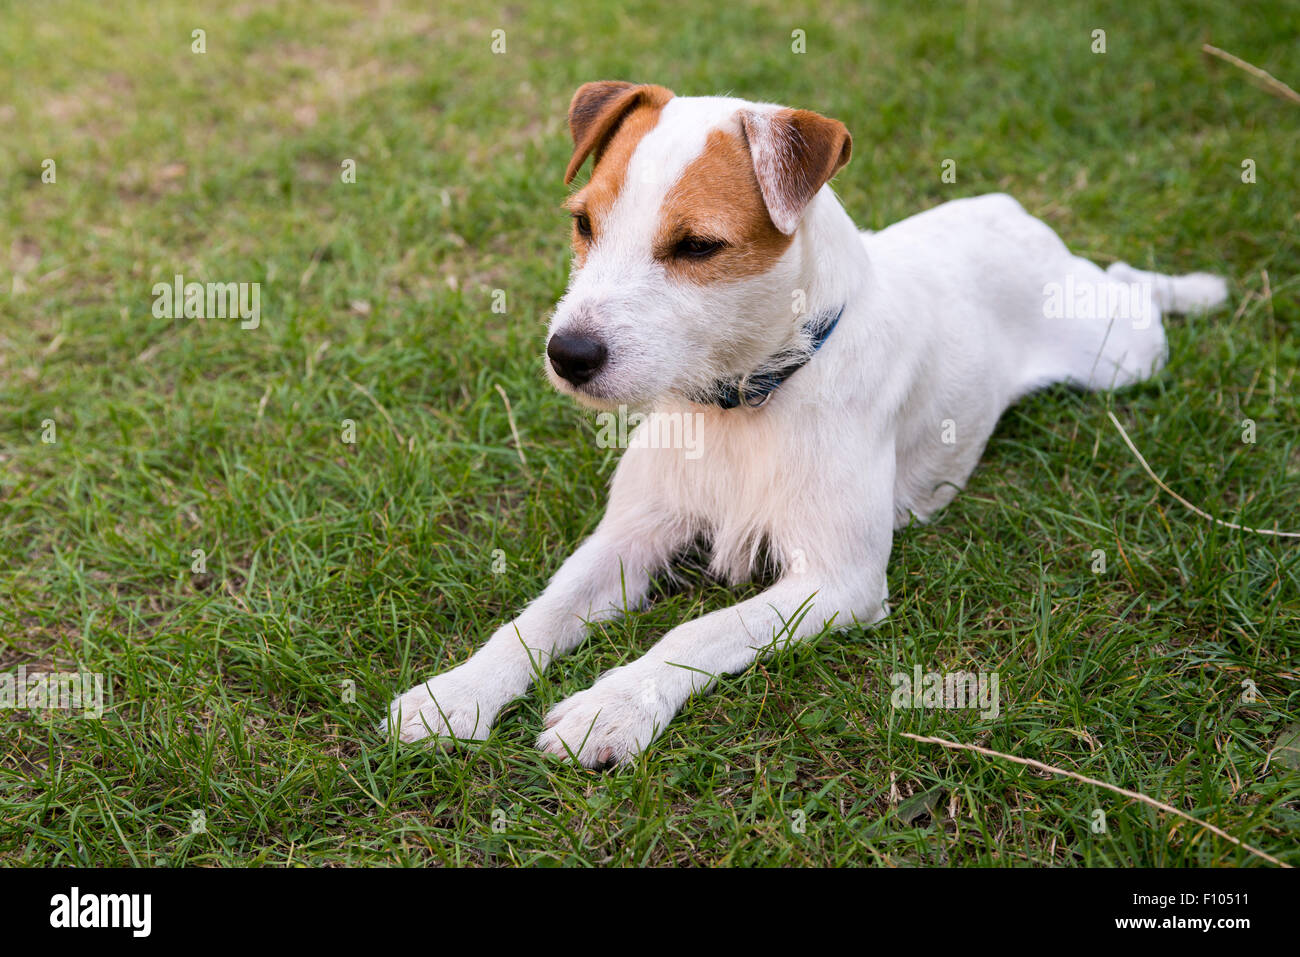 Parson Jack Russell Terrier lying on the grass at backyard Stock Photo